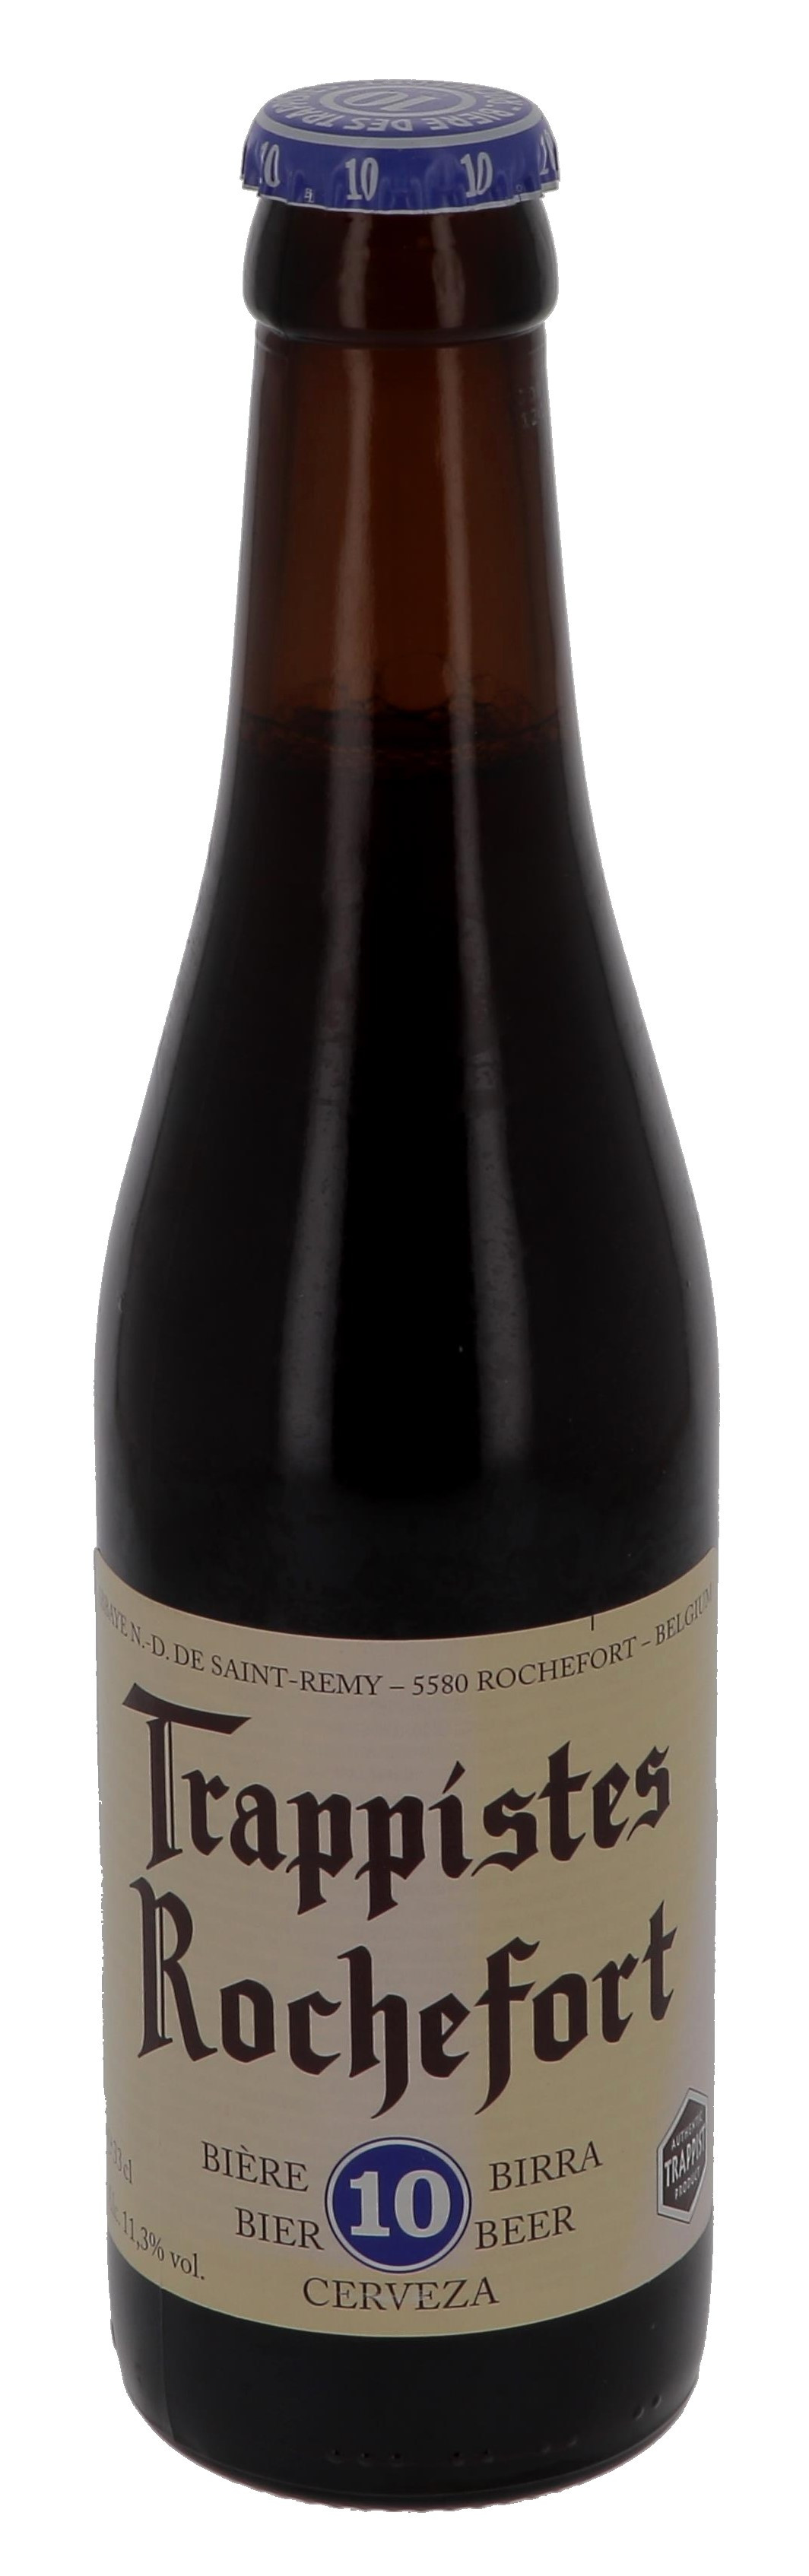 Trappistes Rochefort 10 33cl